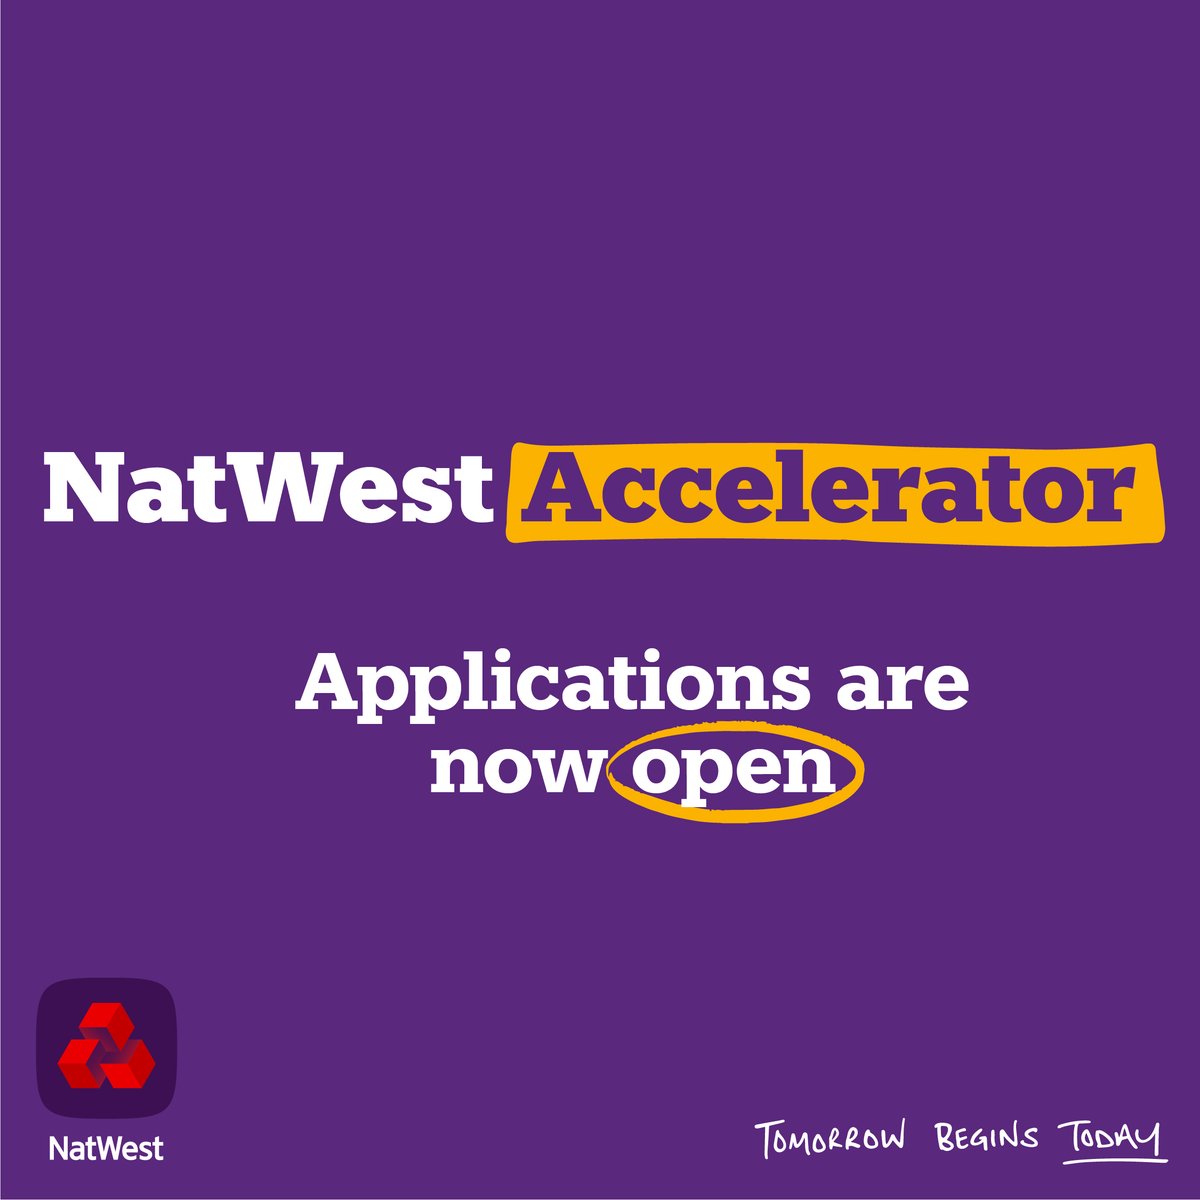 Do you need to grow your #CBedsBusiness? @NatWestBusiness are now accepting #applications for the next #NatWest #Accelerator Programme cohort.
Sign up now:  ow.ly/IzUq50PkvxN 
@SEMLEPGrowthHub @BedsLive 
#coaching #leadership #experts #network